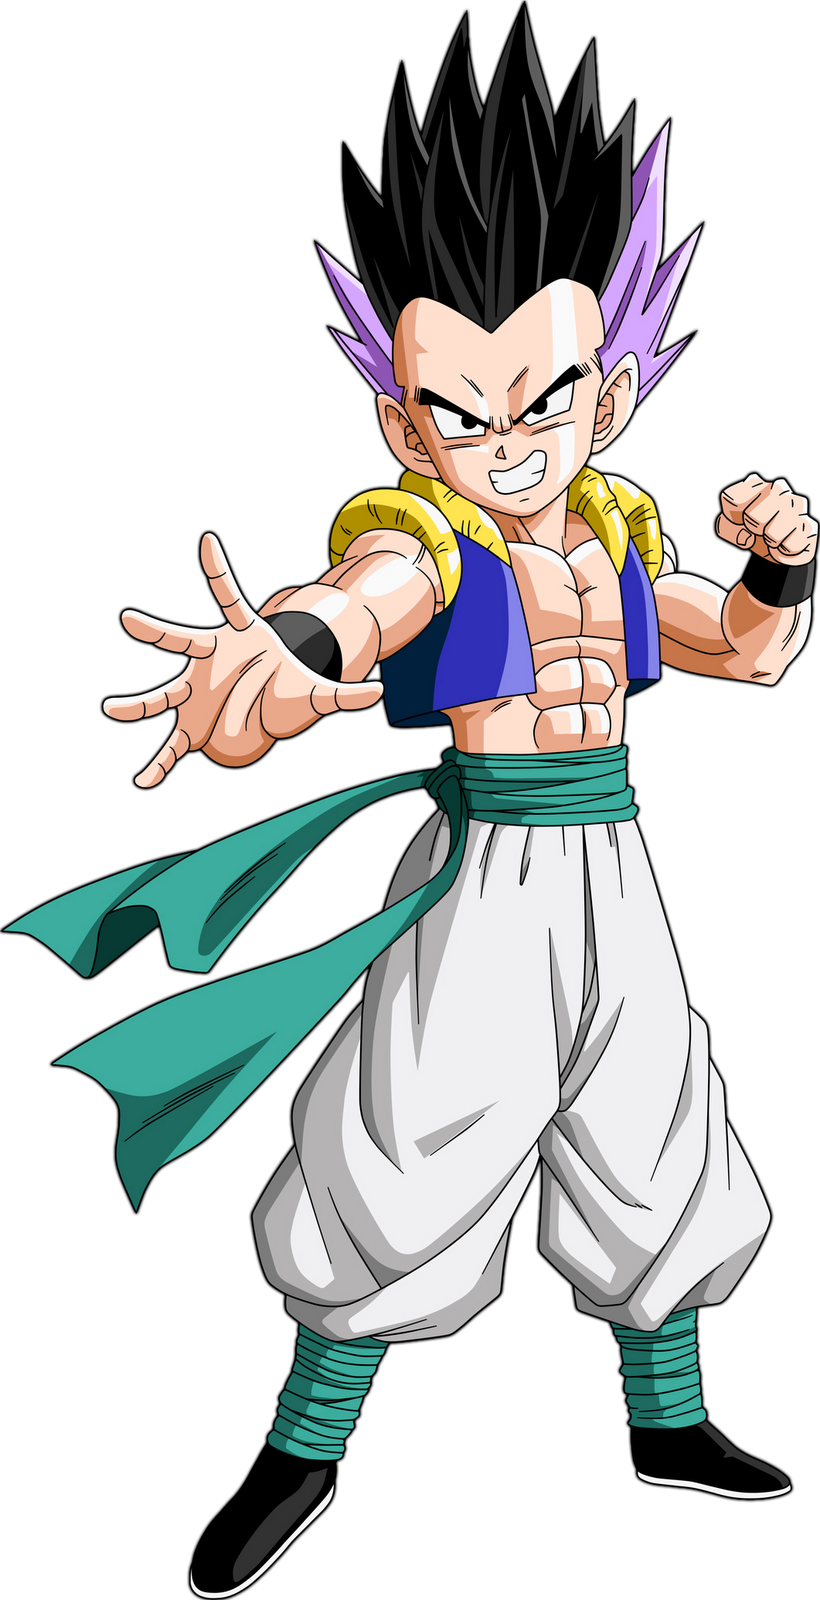 Gotenks is the Metamoran fusion of Goten and Trunks, formed to defeat Majin Buu. 